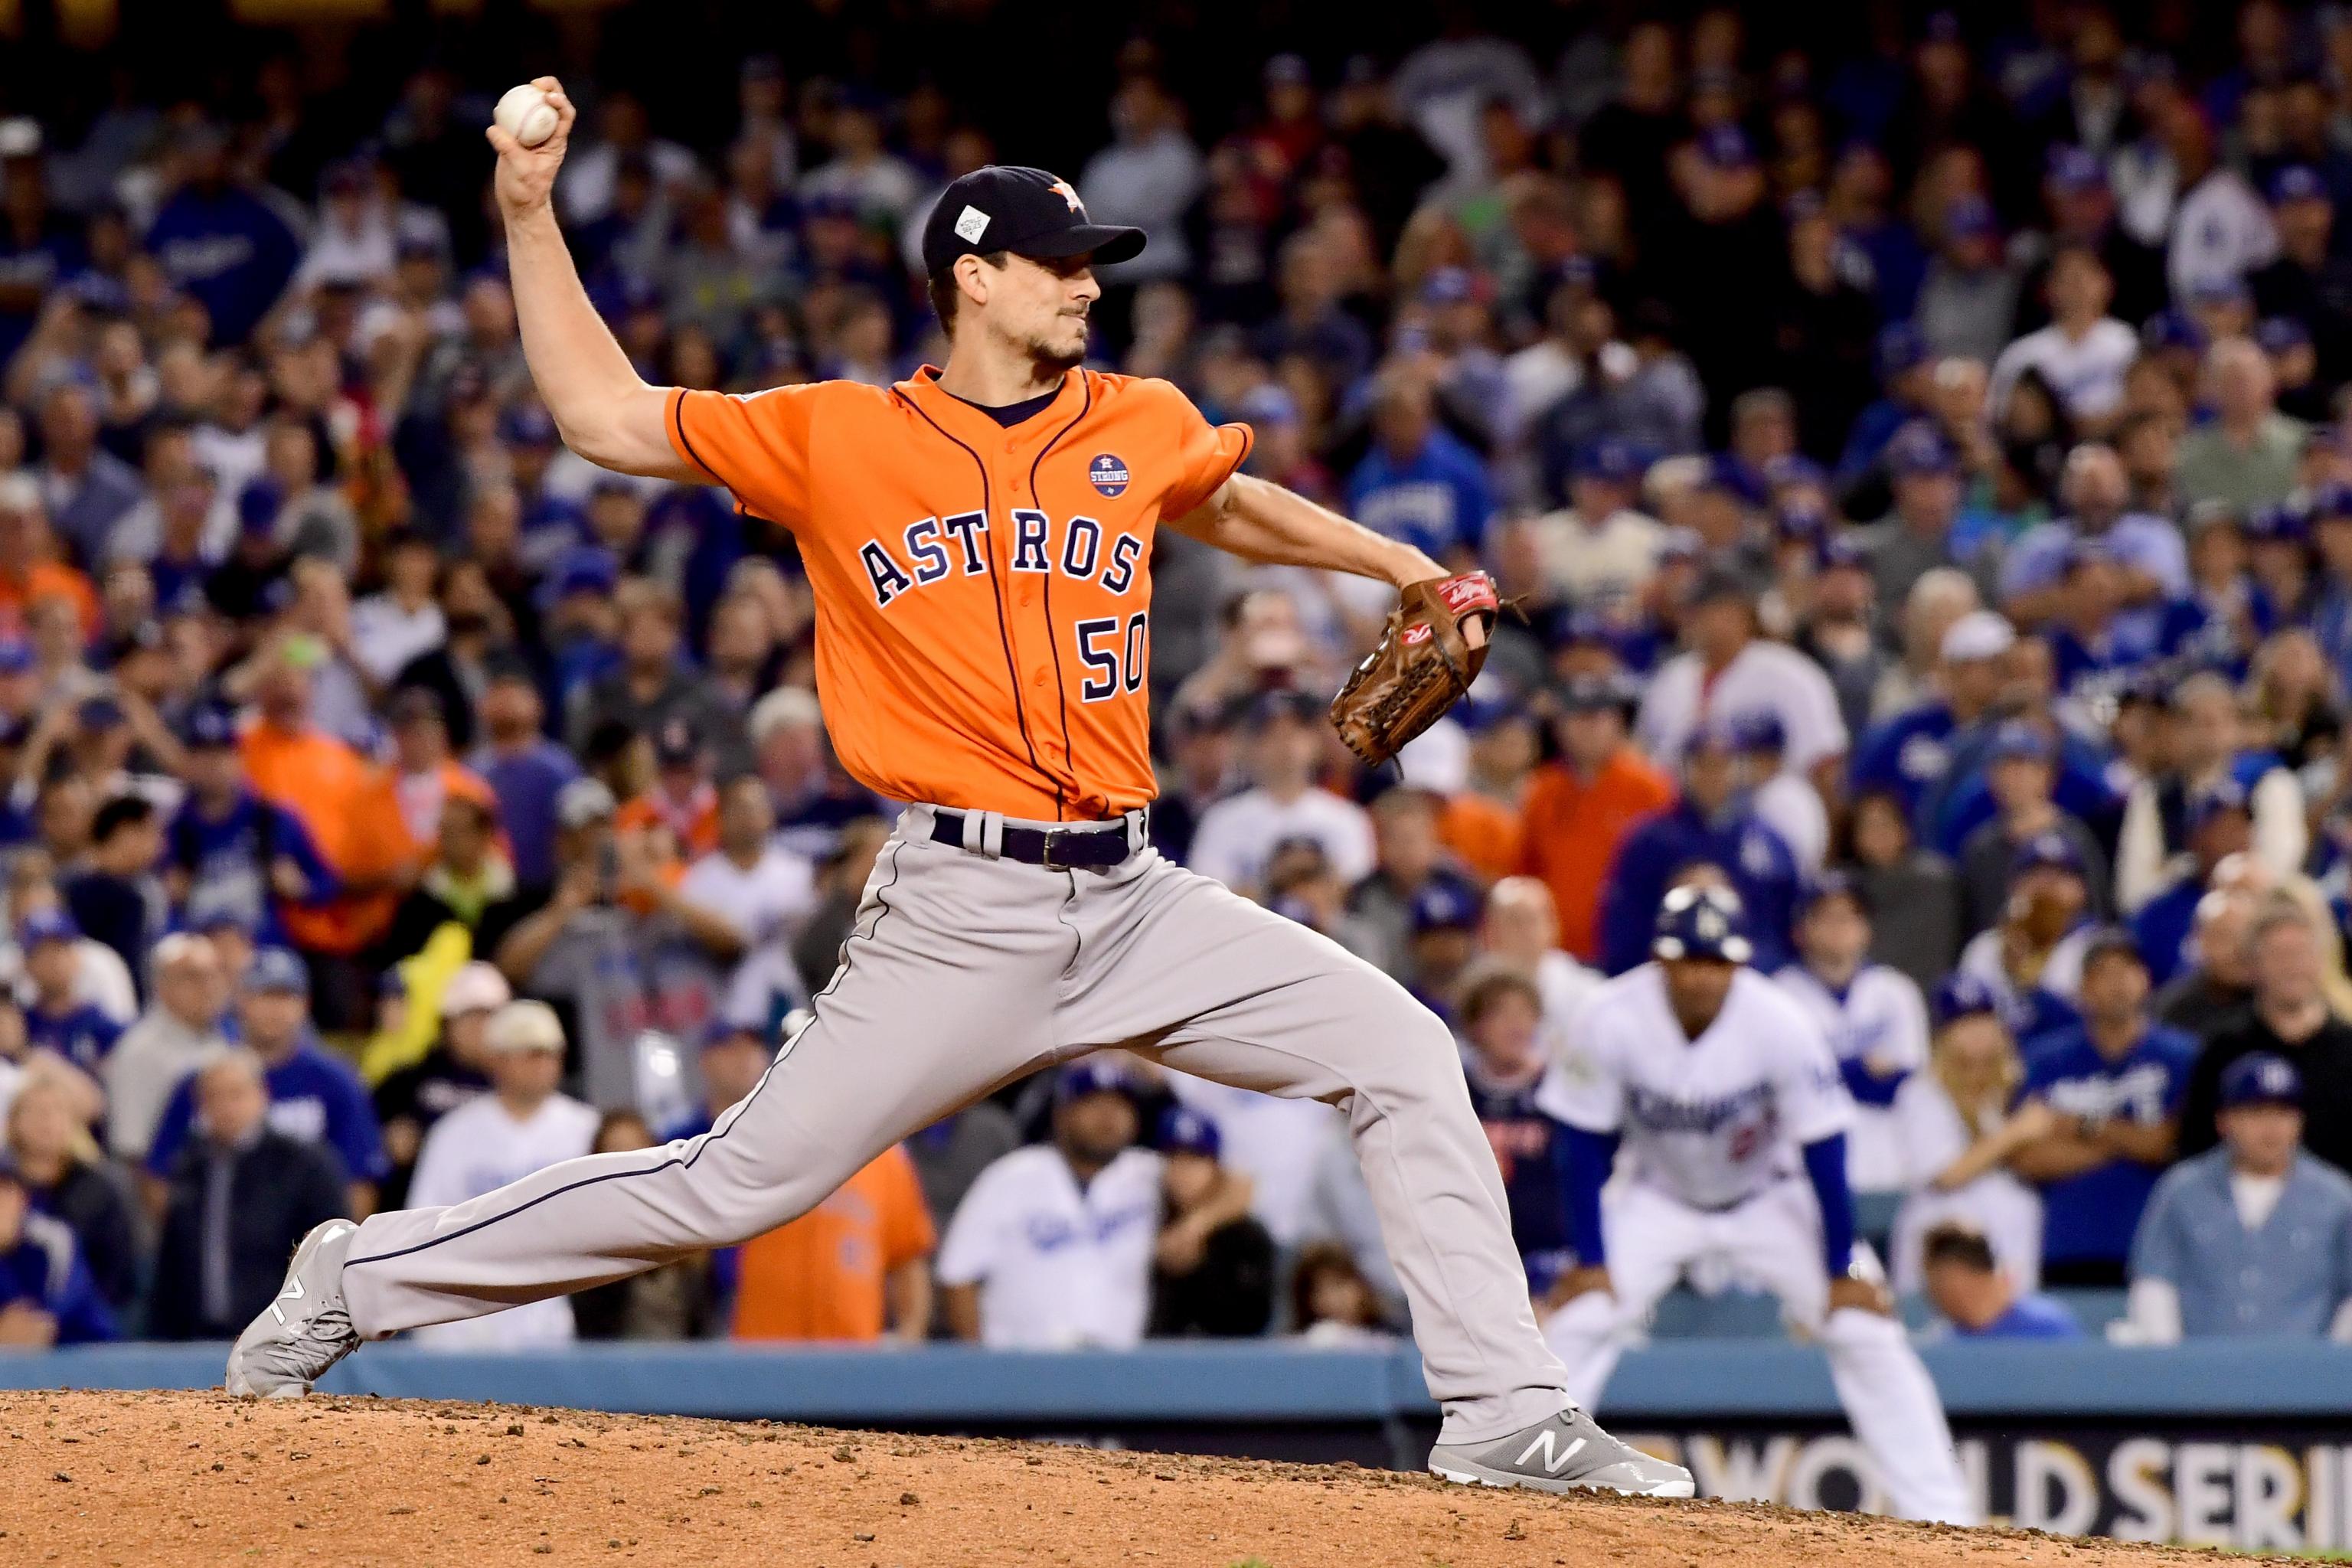 Charlie Morton 1st Game 7 Winner of Both LCS and World Series in